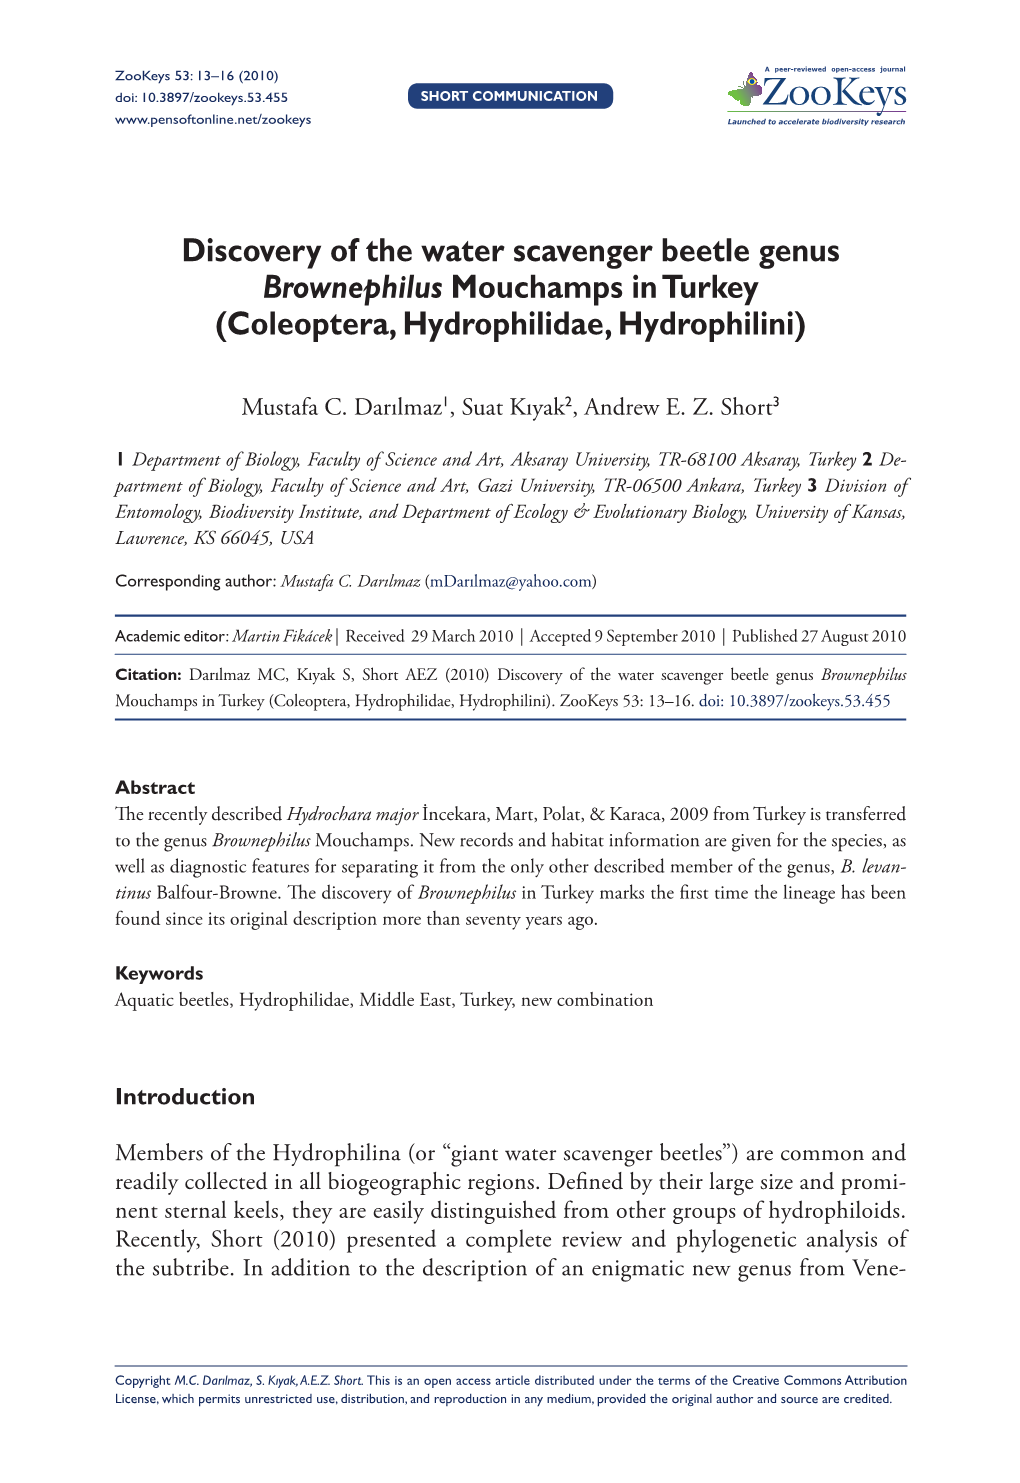 Discovery of the Water Scavenger Beetle Genus Brownephilus Mouchamps in Turkey (Coleoptera, Hydrophilidae, Hydrophilini)